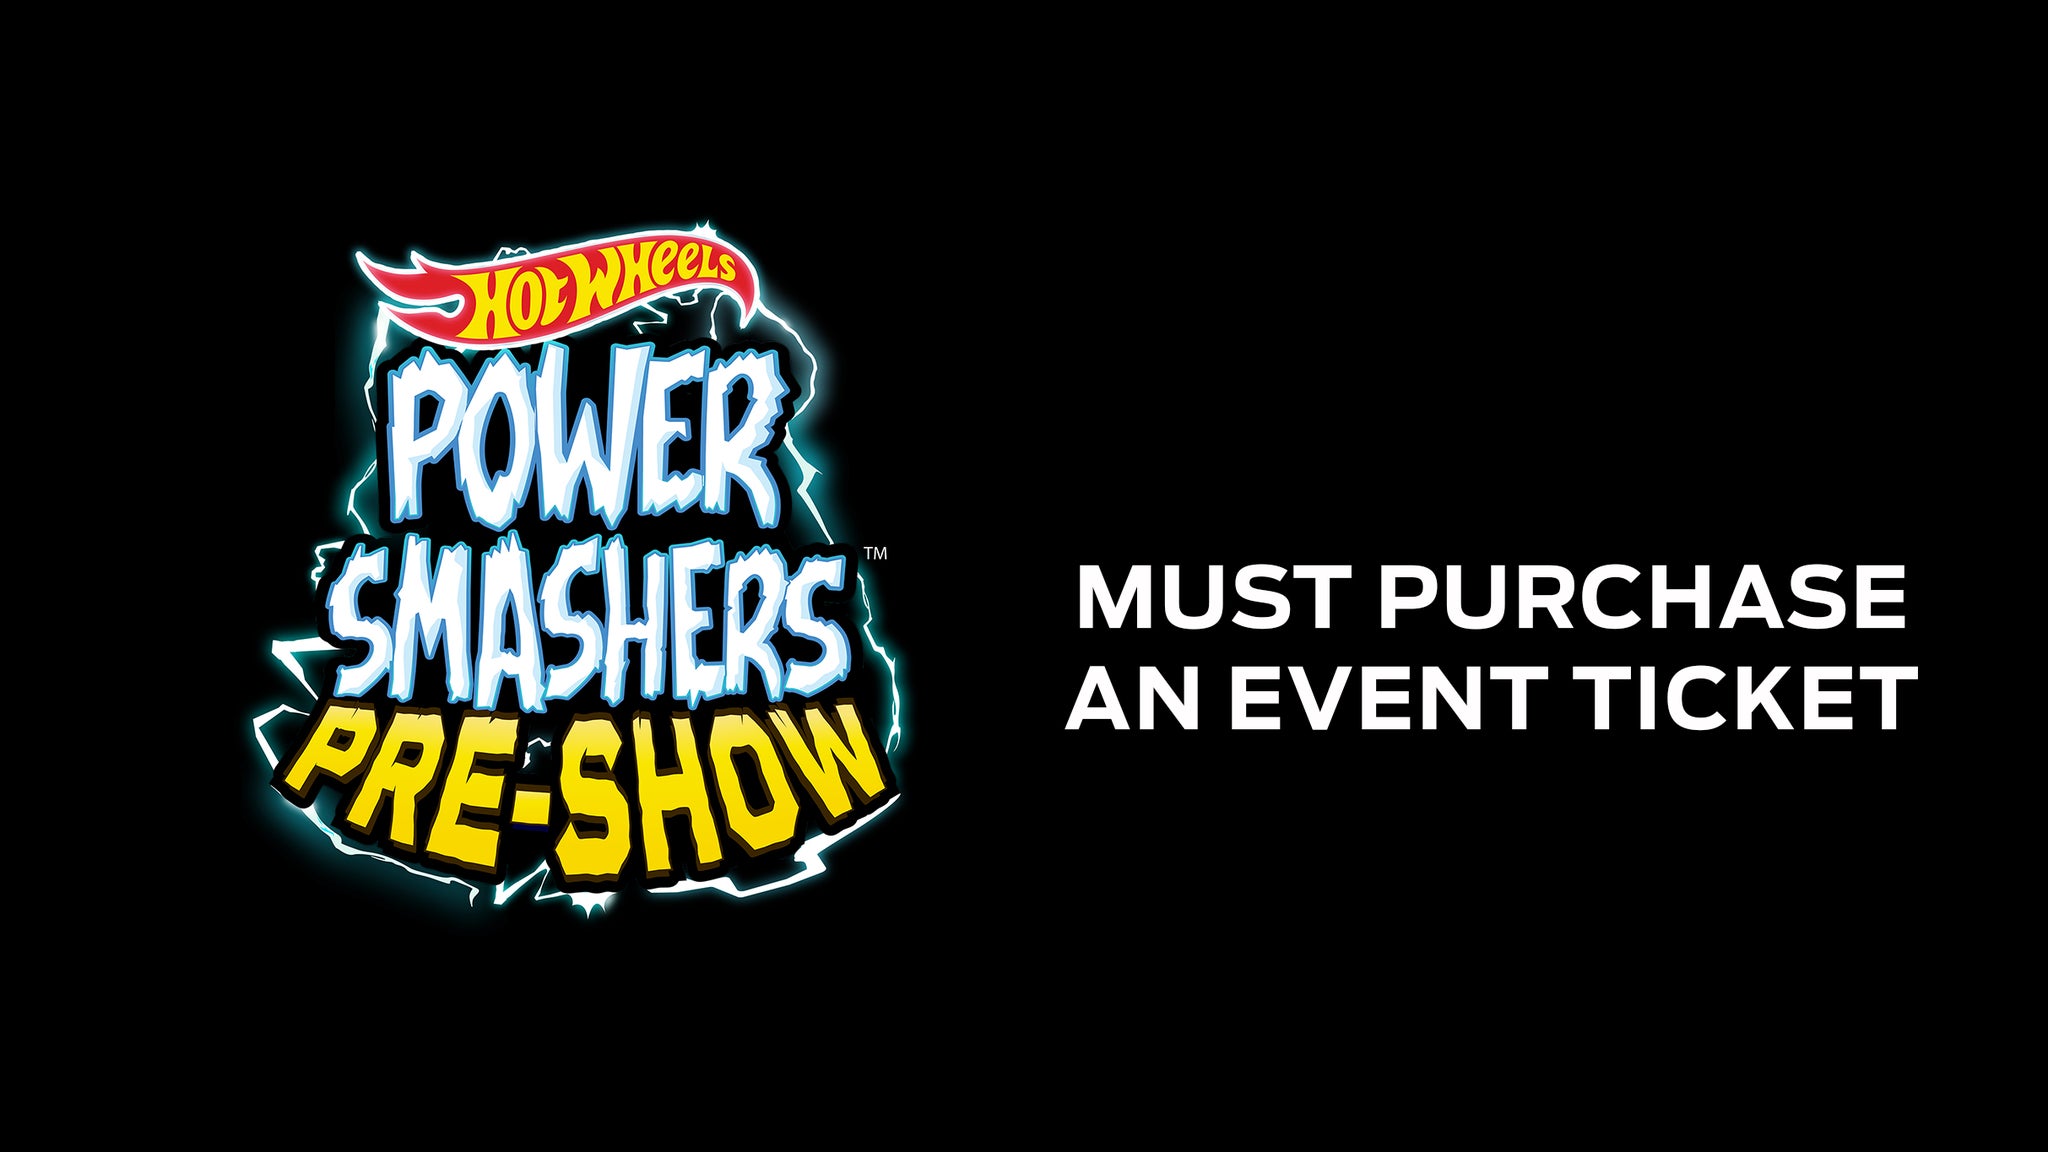 Hot Wheels Power Smashers Pre-Show Starts At 12pm